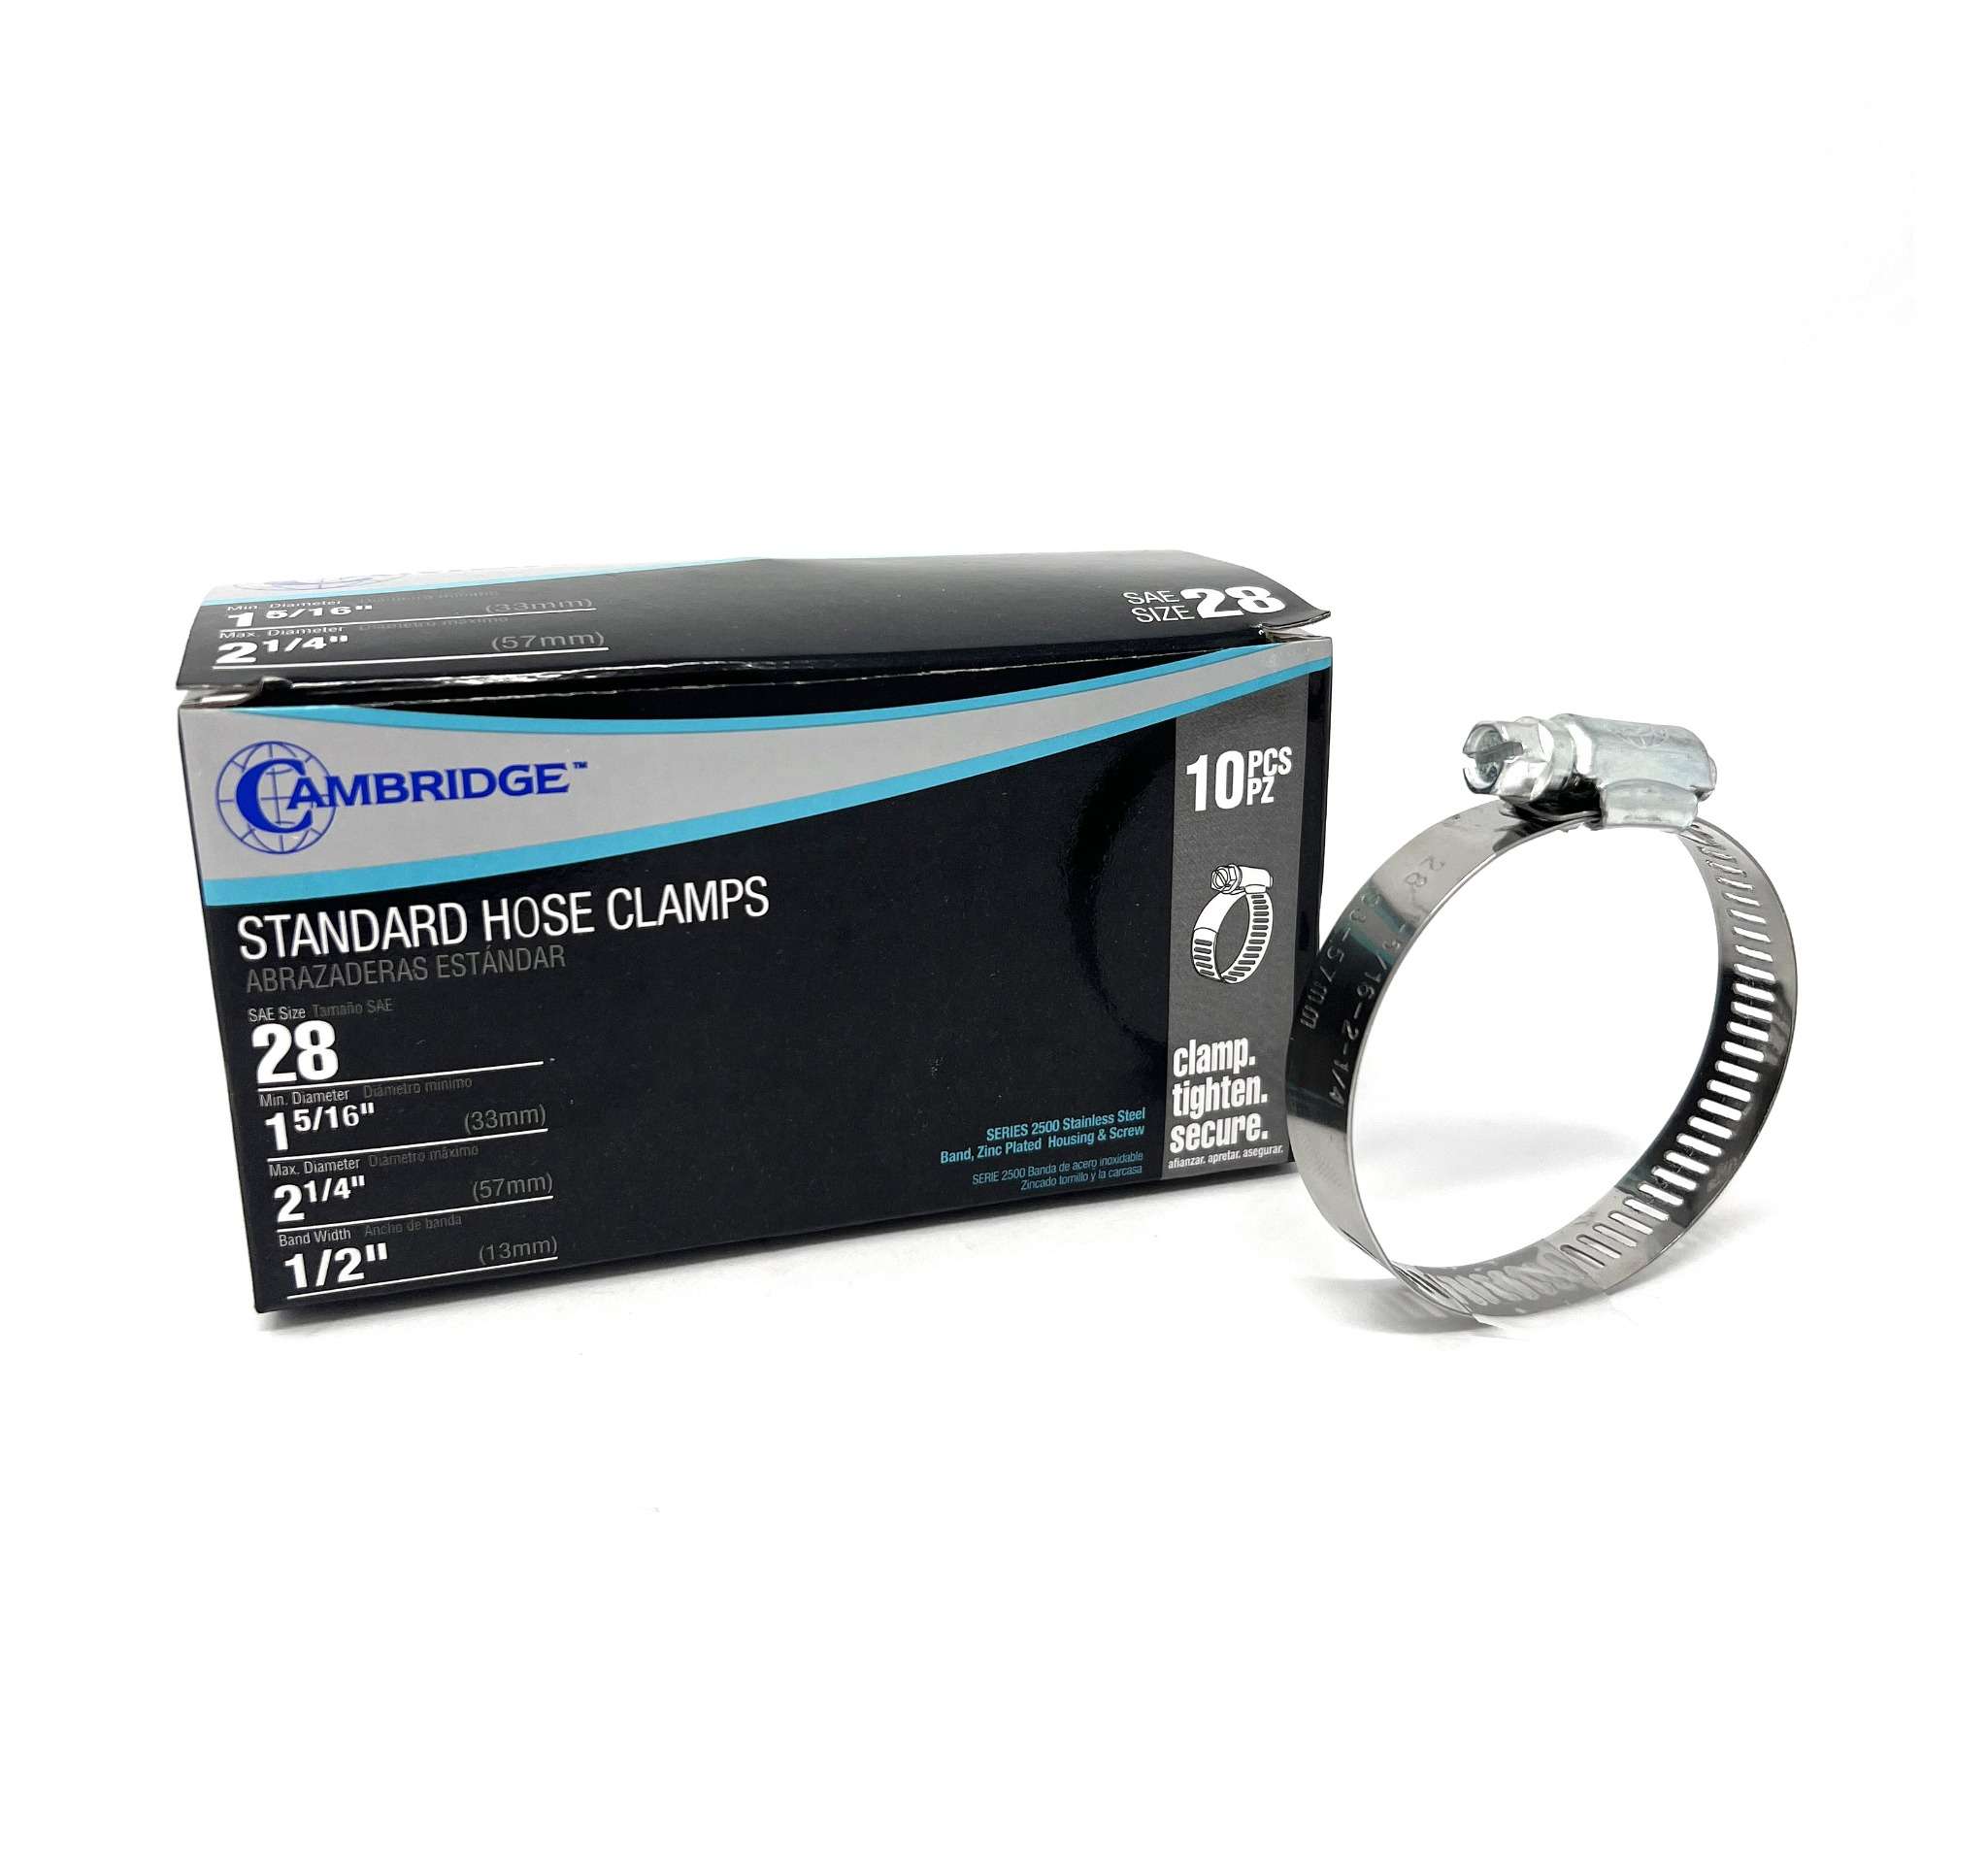 #28   1 5/16 TO 2 1/4 STANDARD HOSE CLAMP (Box of 10)